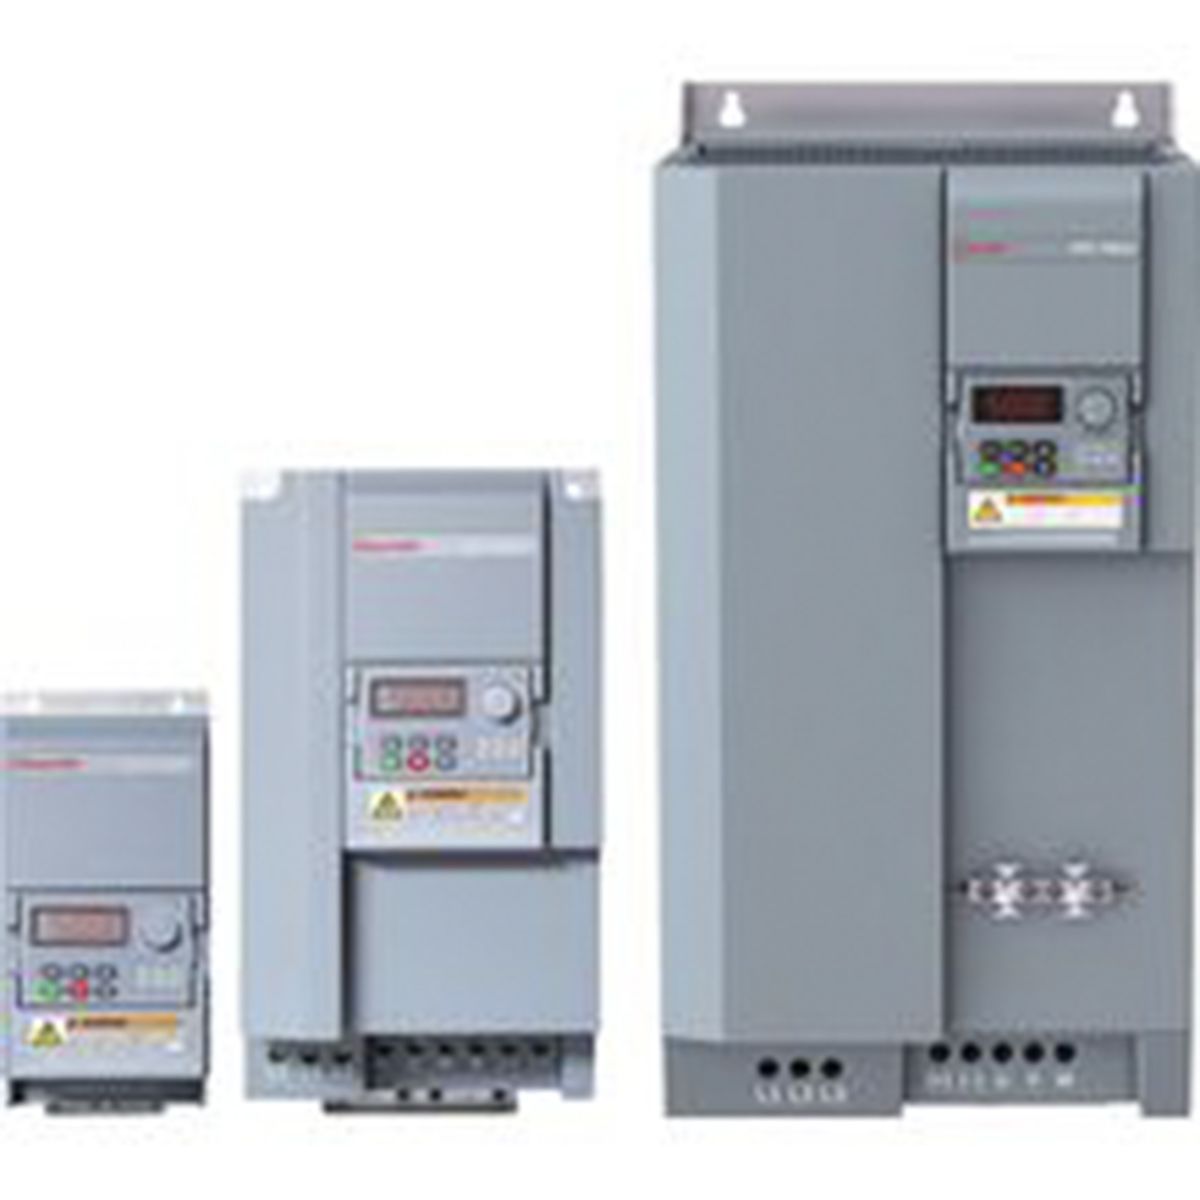 Bosch Rexroth EFC 5610 Inverter Drive, 1-Phase In, 0 → 400Hz Out, 0.4 kW, 230 V ac, 2.4 A